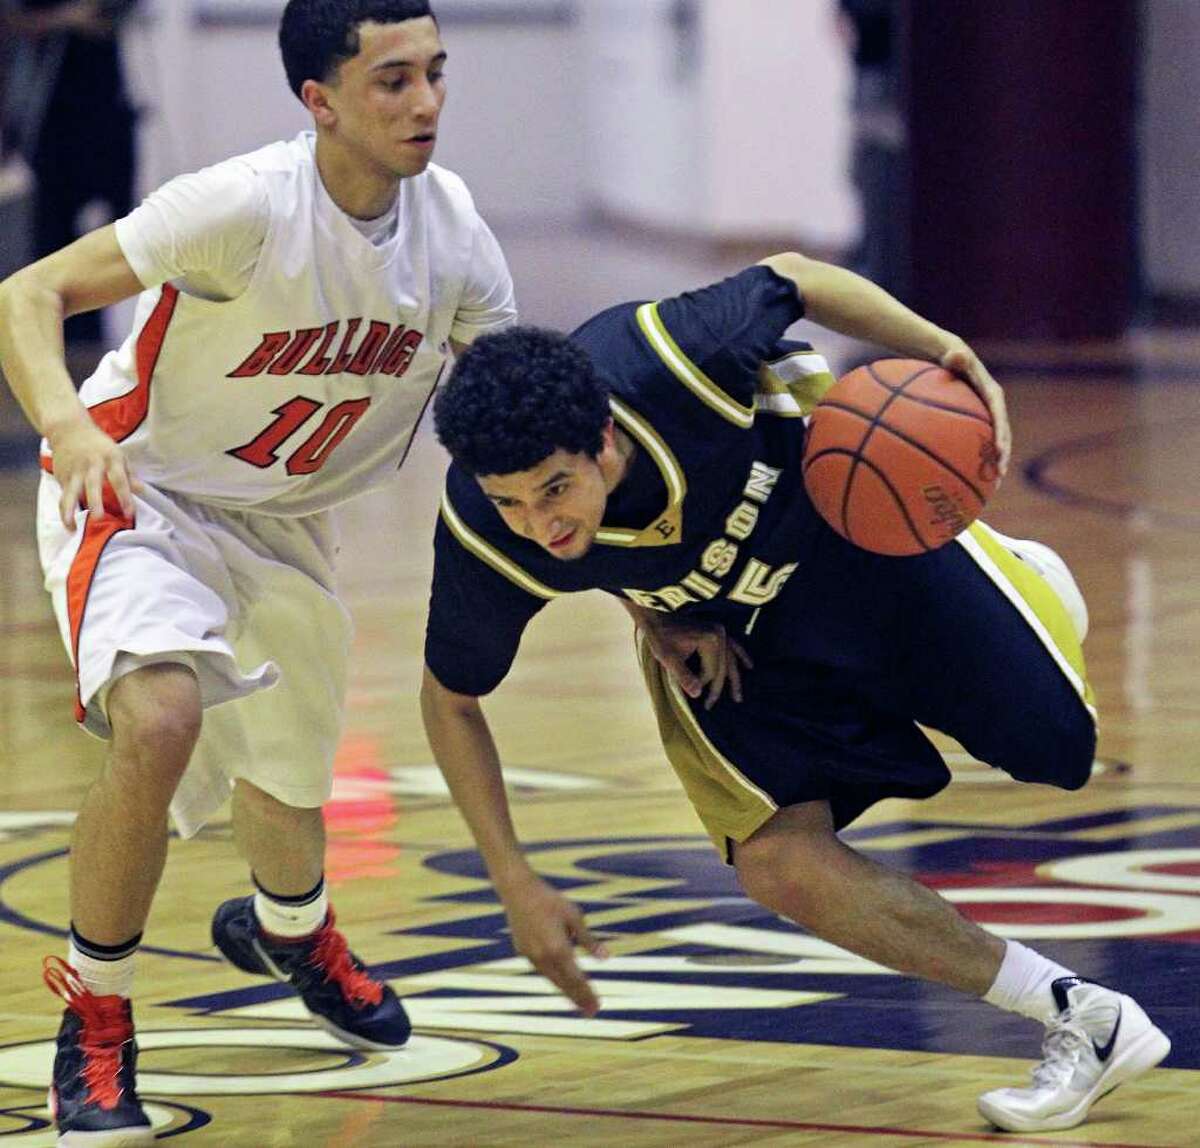 Edison's Artie Vela, who had 18 points, spins by Burbank's Jason Ainsworth on his way to the basket.